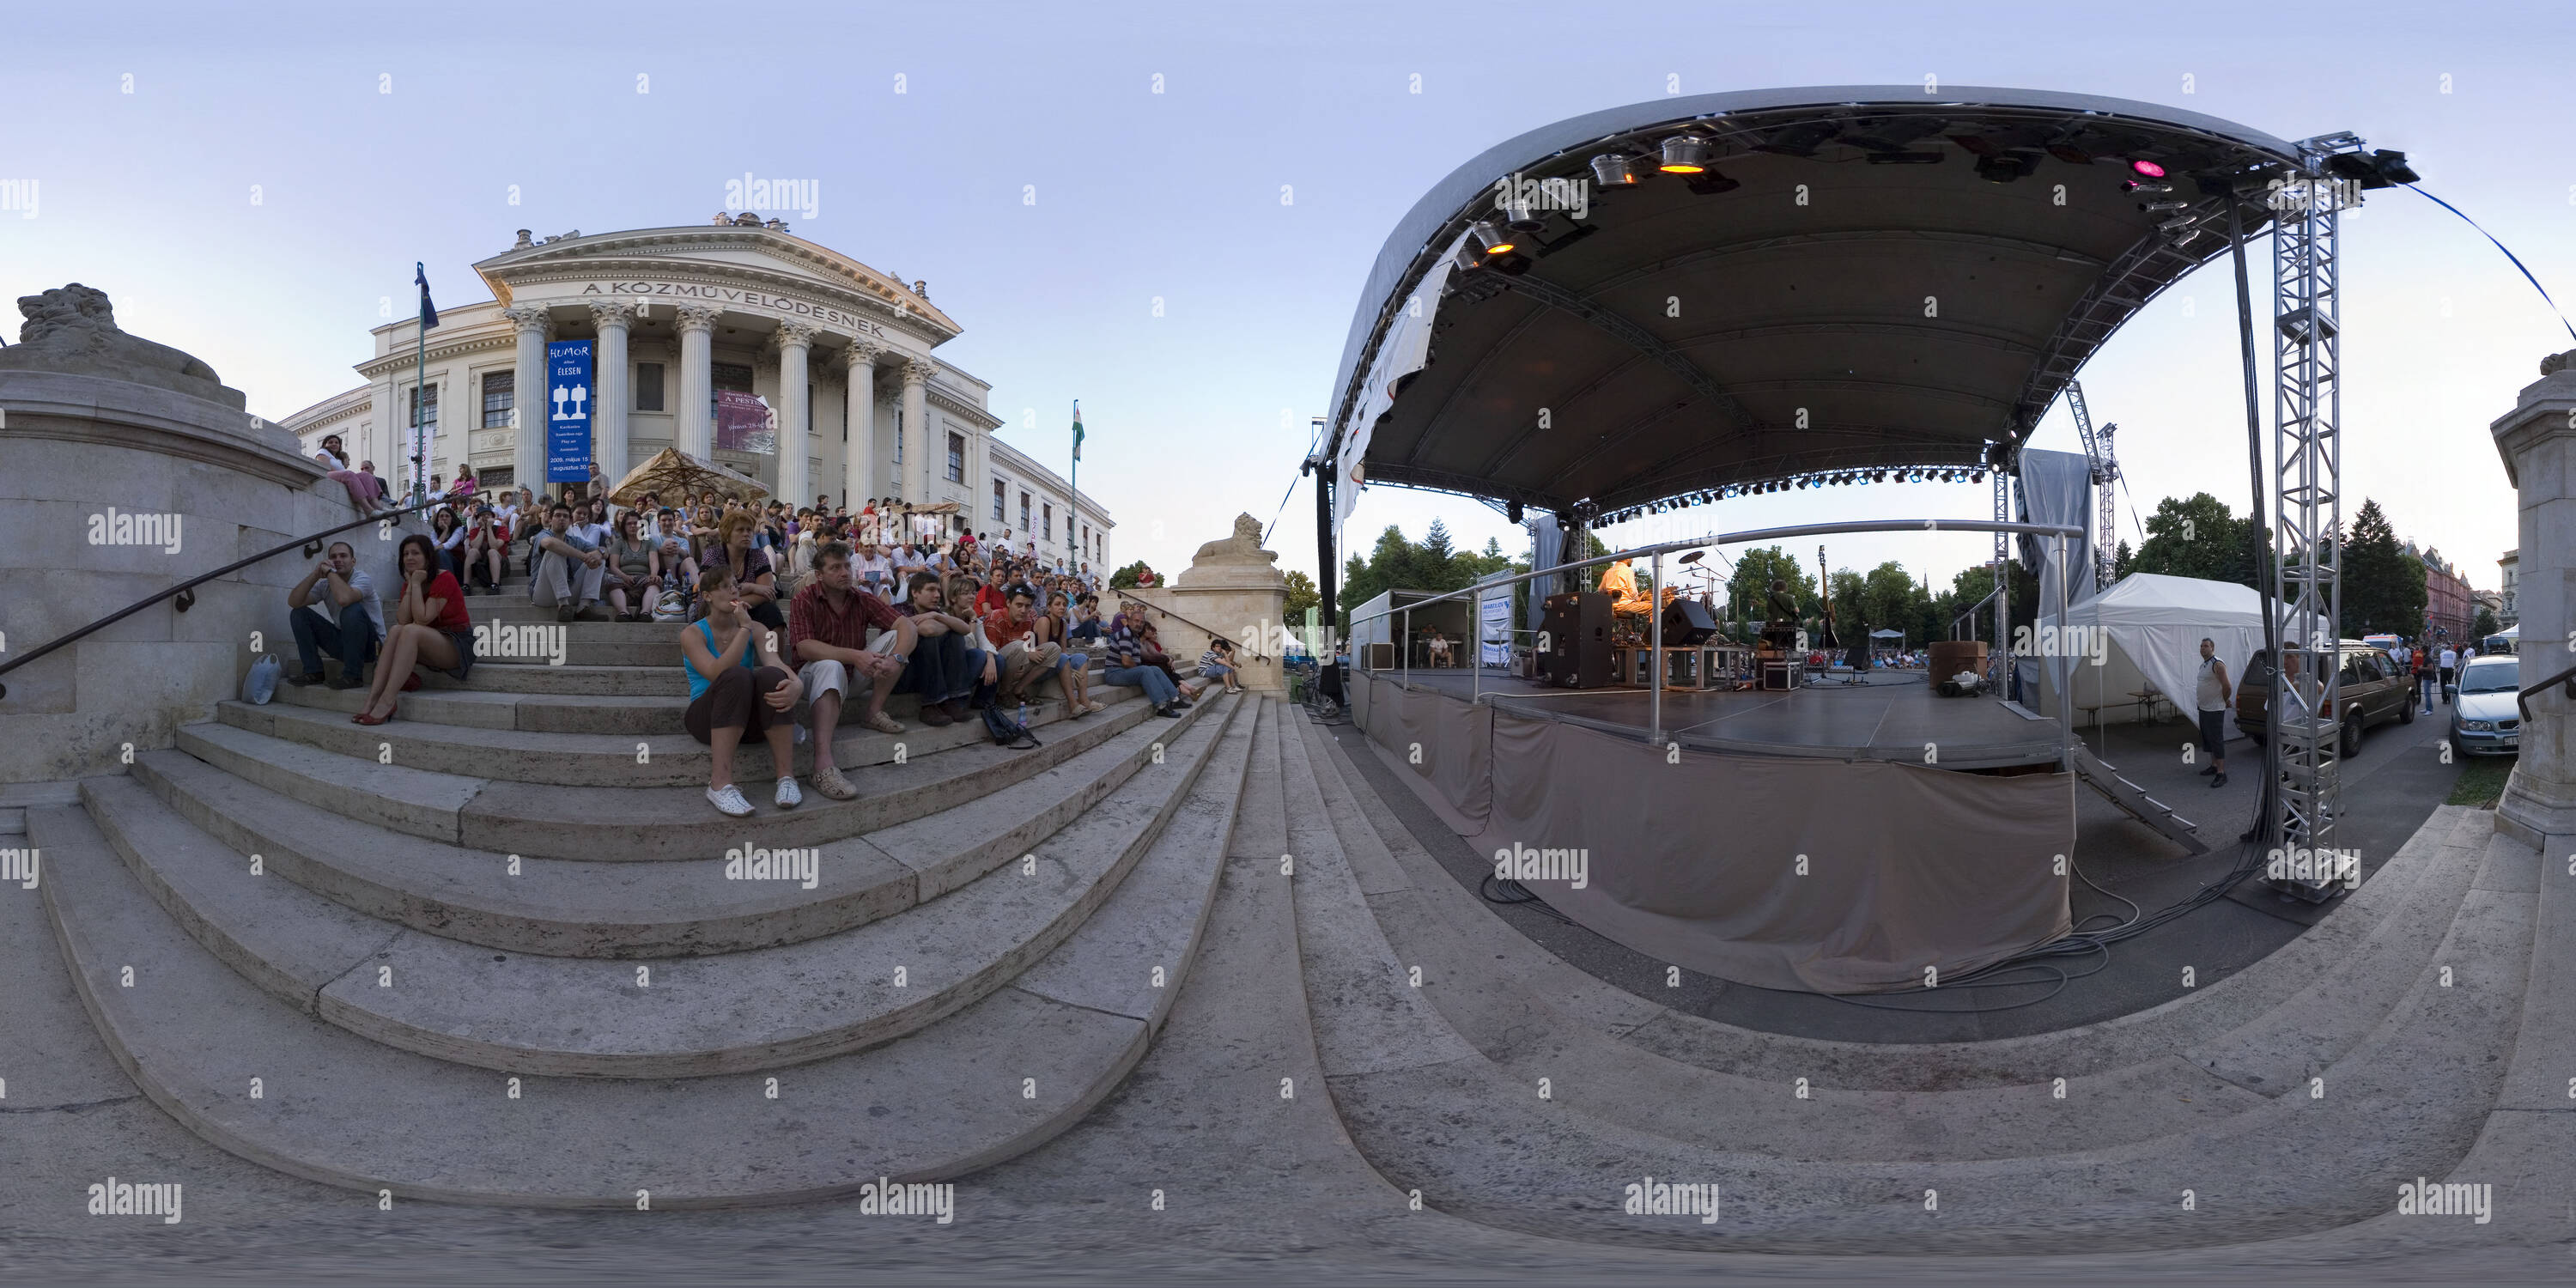 360 degree panoramic view of The day of Szeged - Rock concert